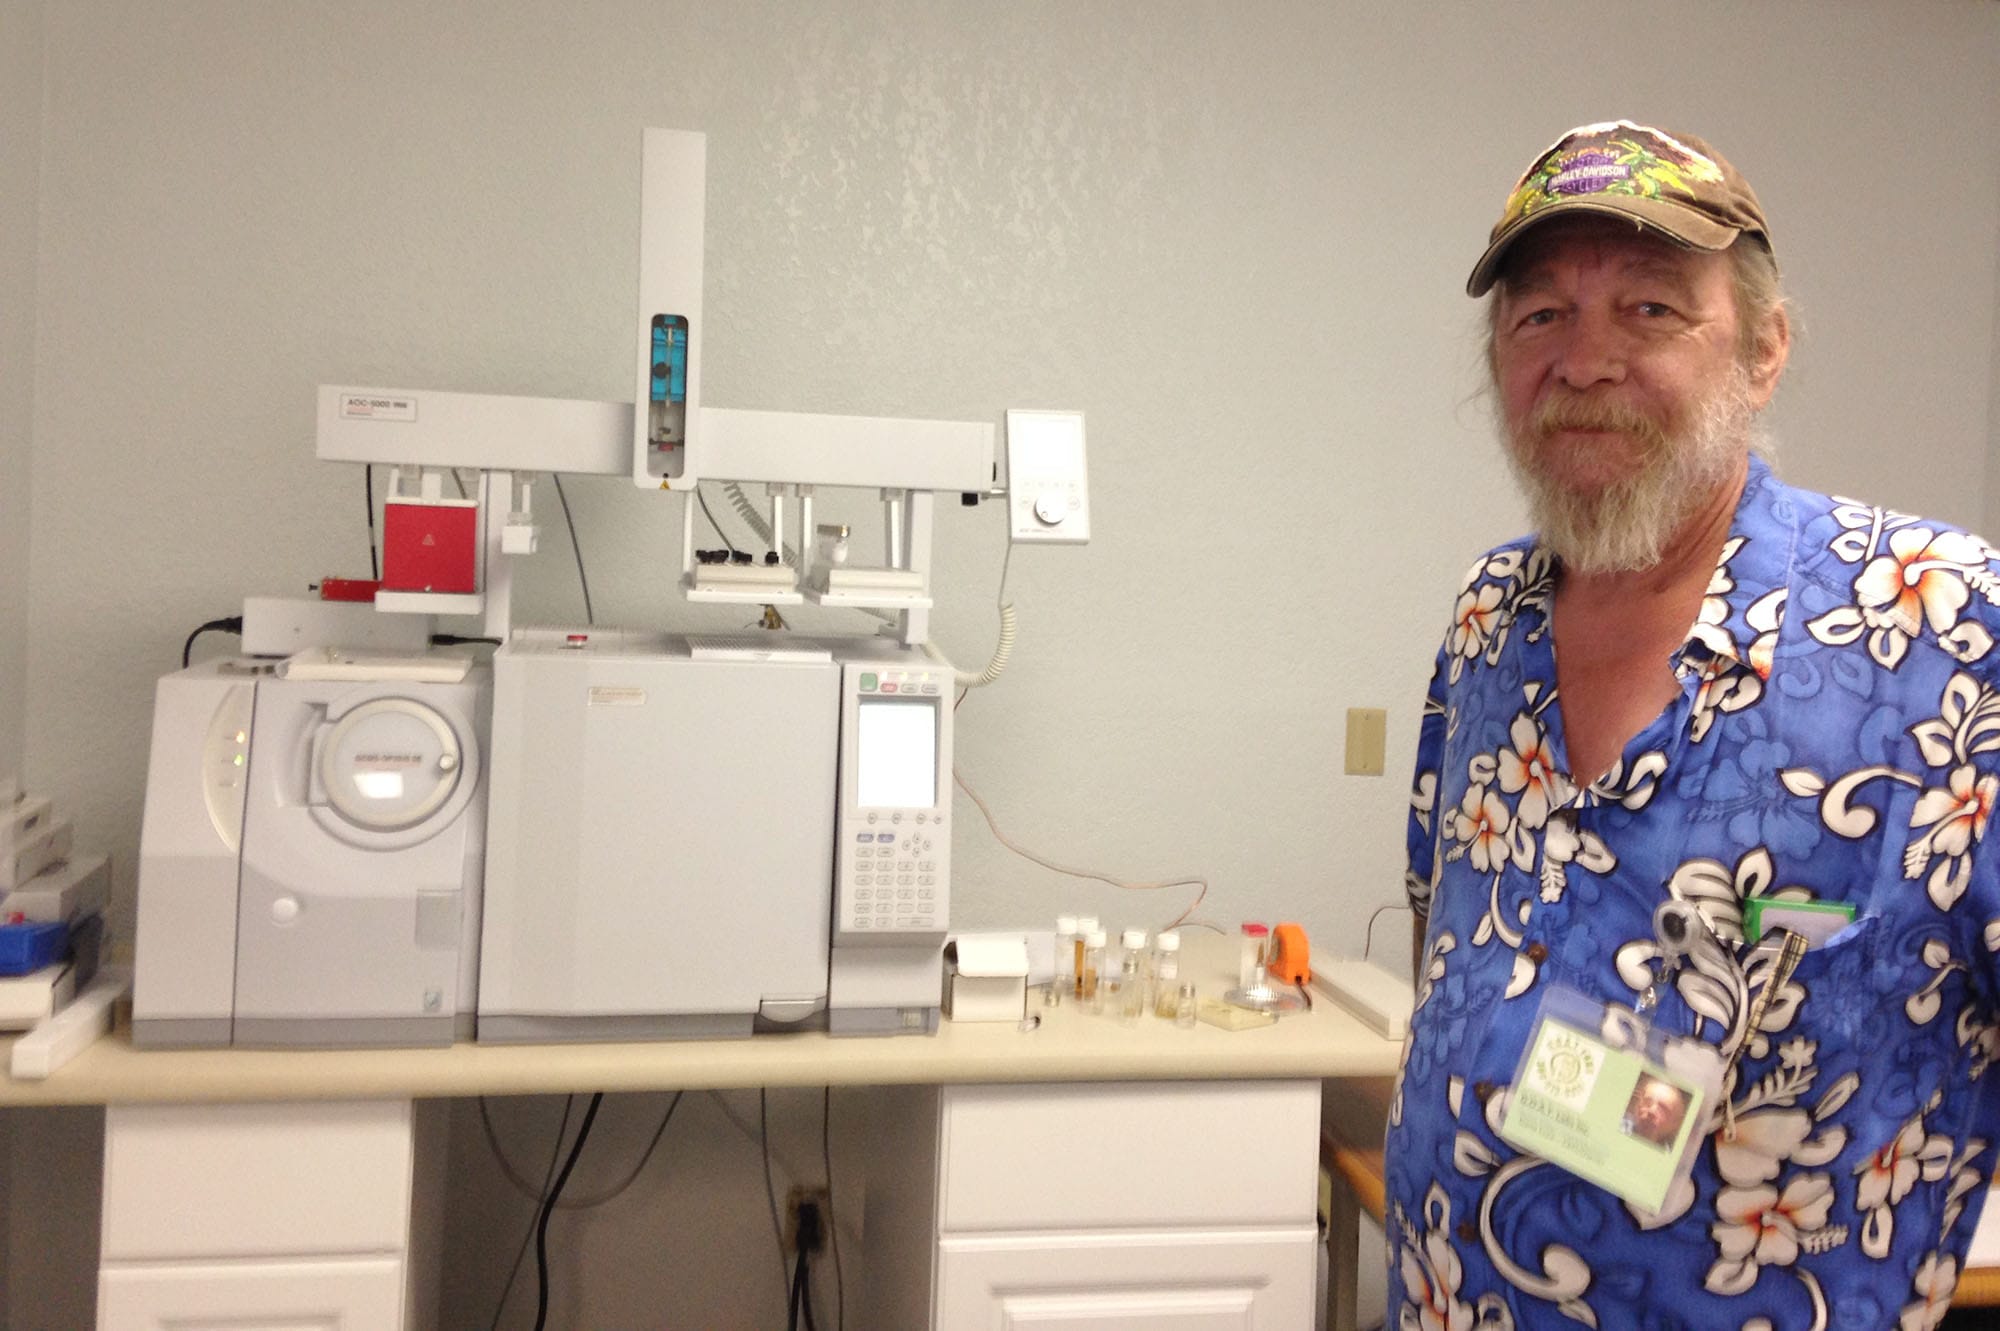 Dana Luce, owner of GOAT Labs, stands next to some of his testing equipment.